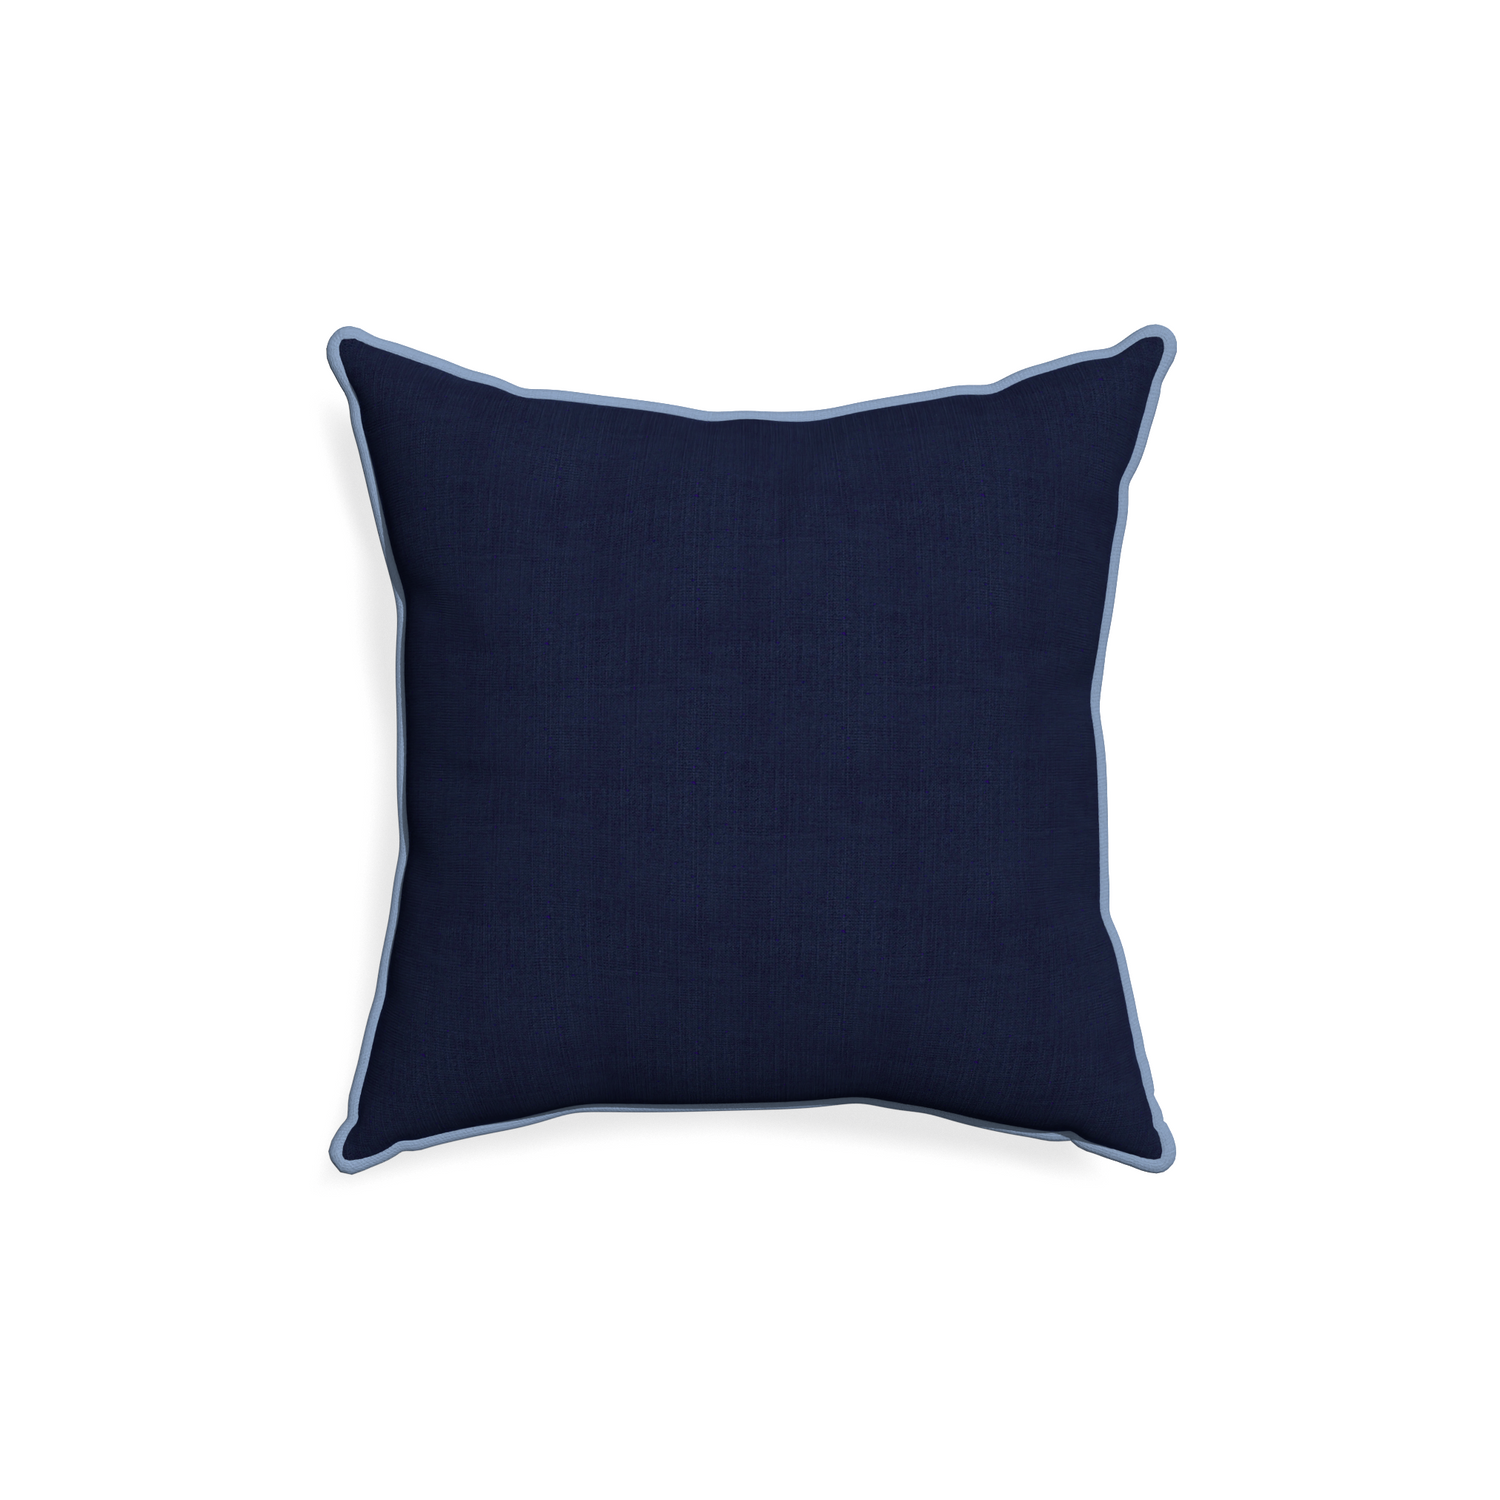 18-square midnight custom navy bluepillow with sky piping on white background